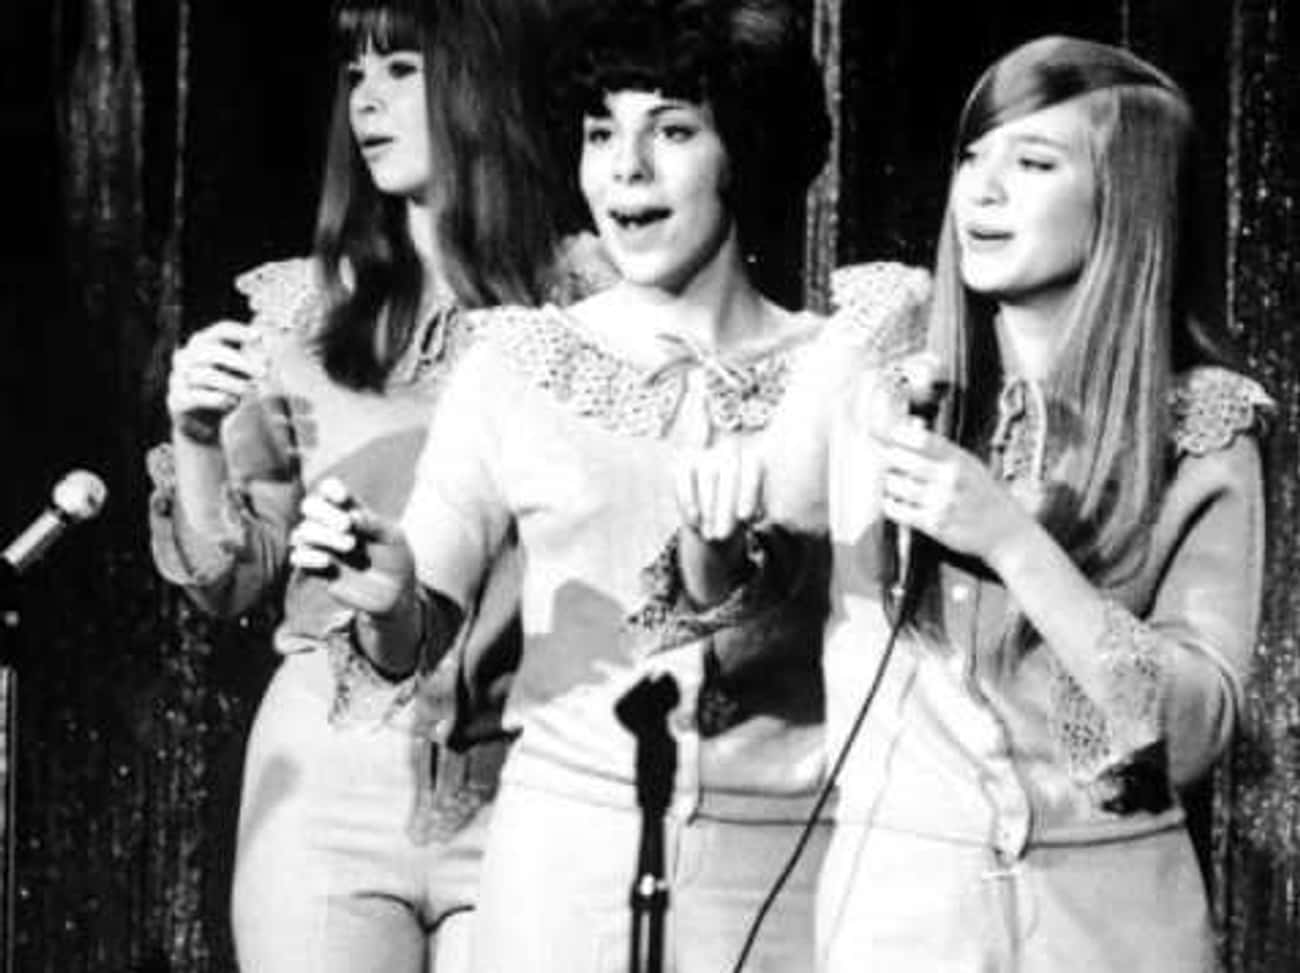 Wild Stories About The Shangri-Las, The High School Girls Who Inspired Punk